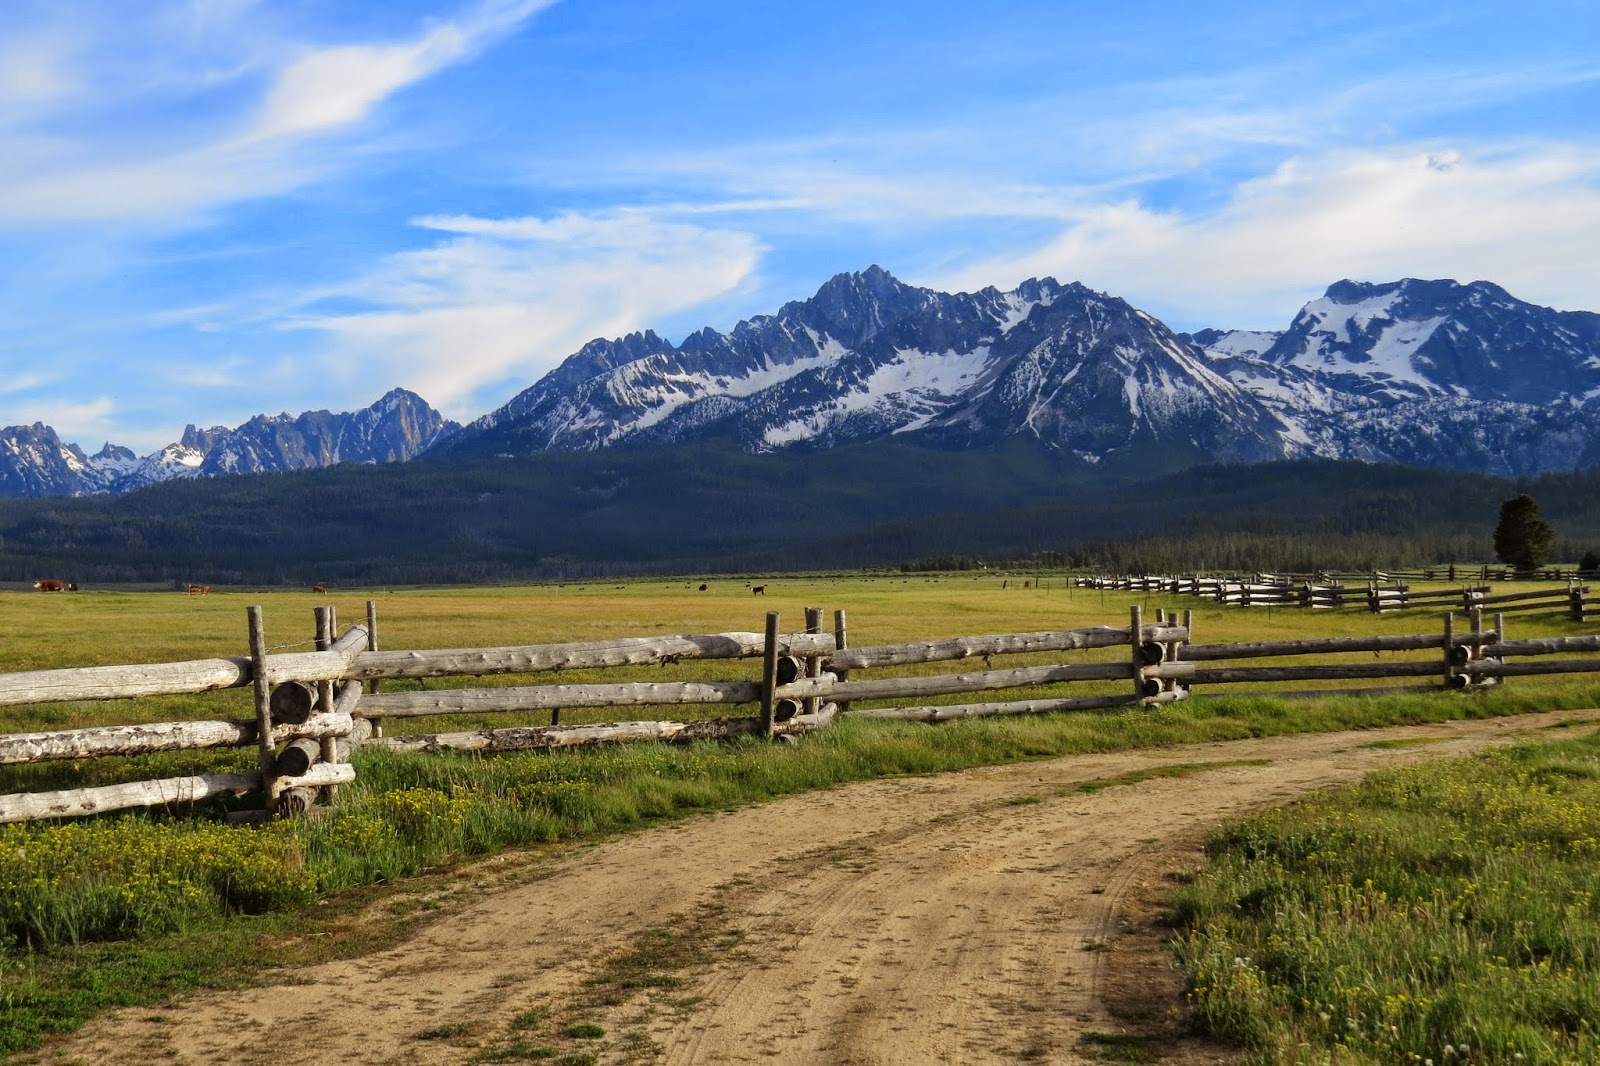 Sawtooth Mountains in Stanley, Idaho